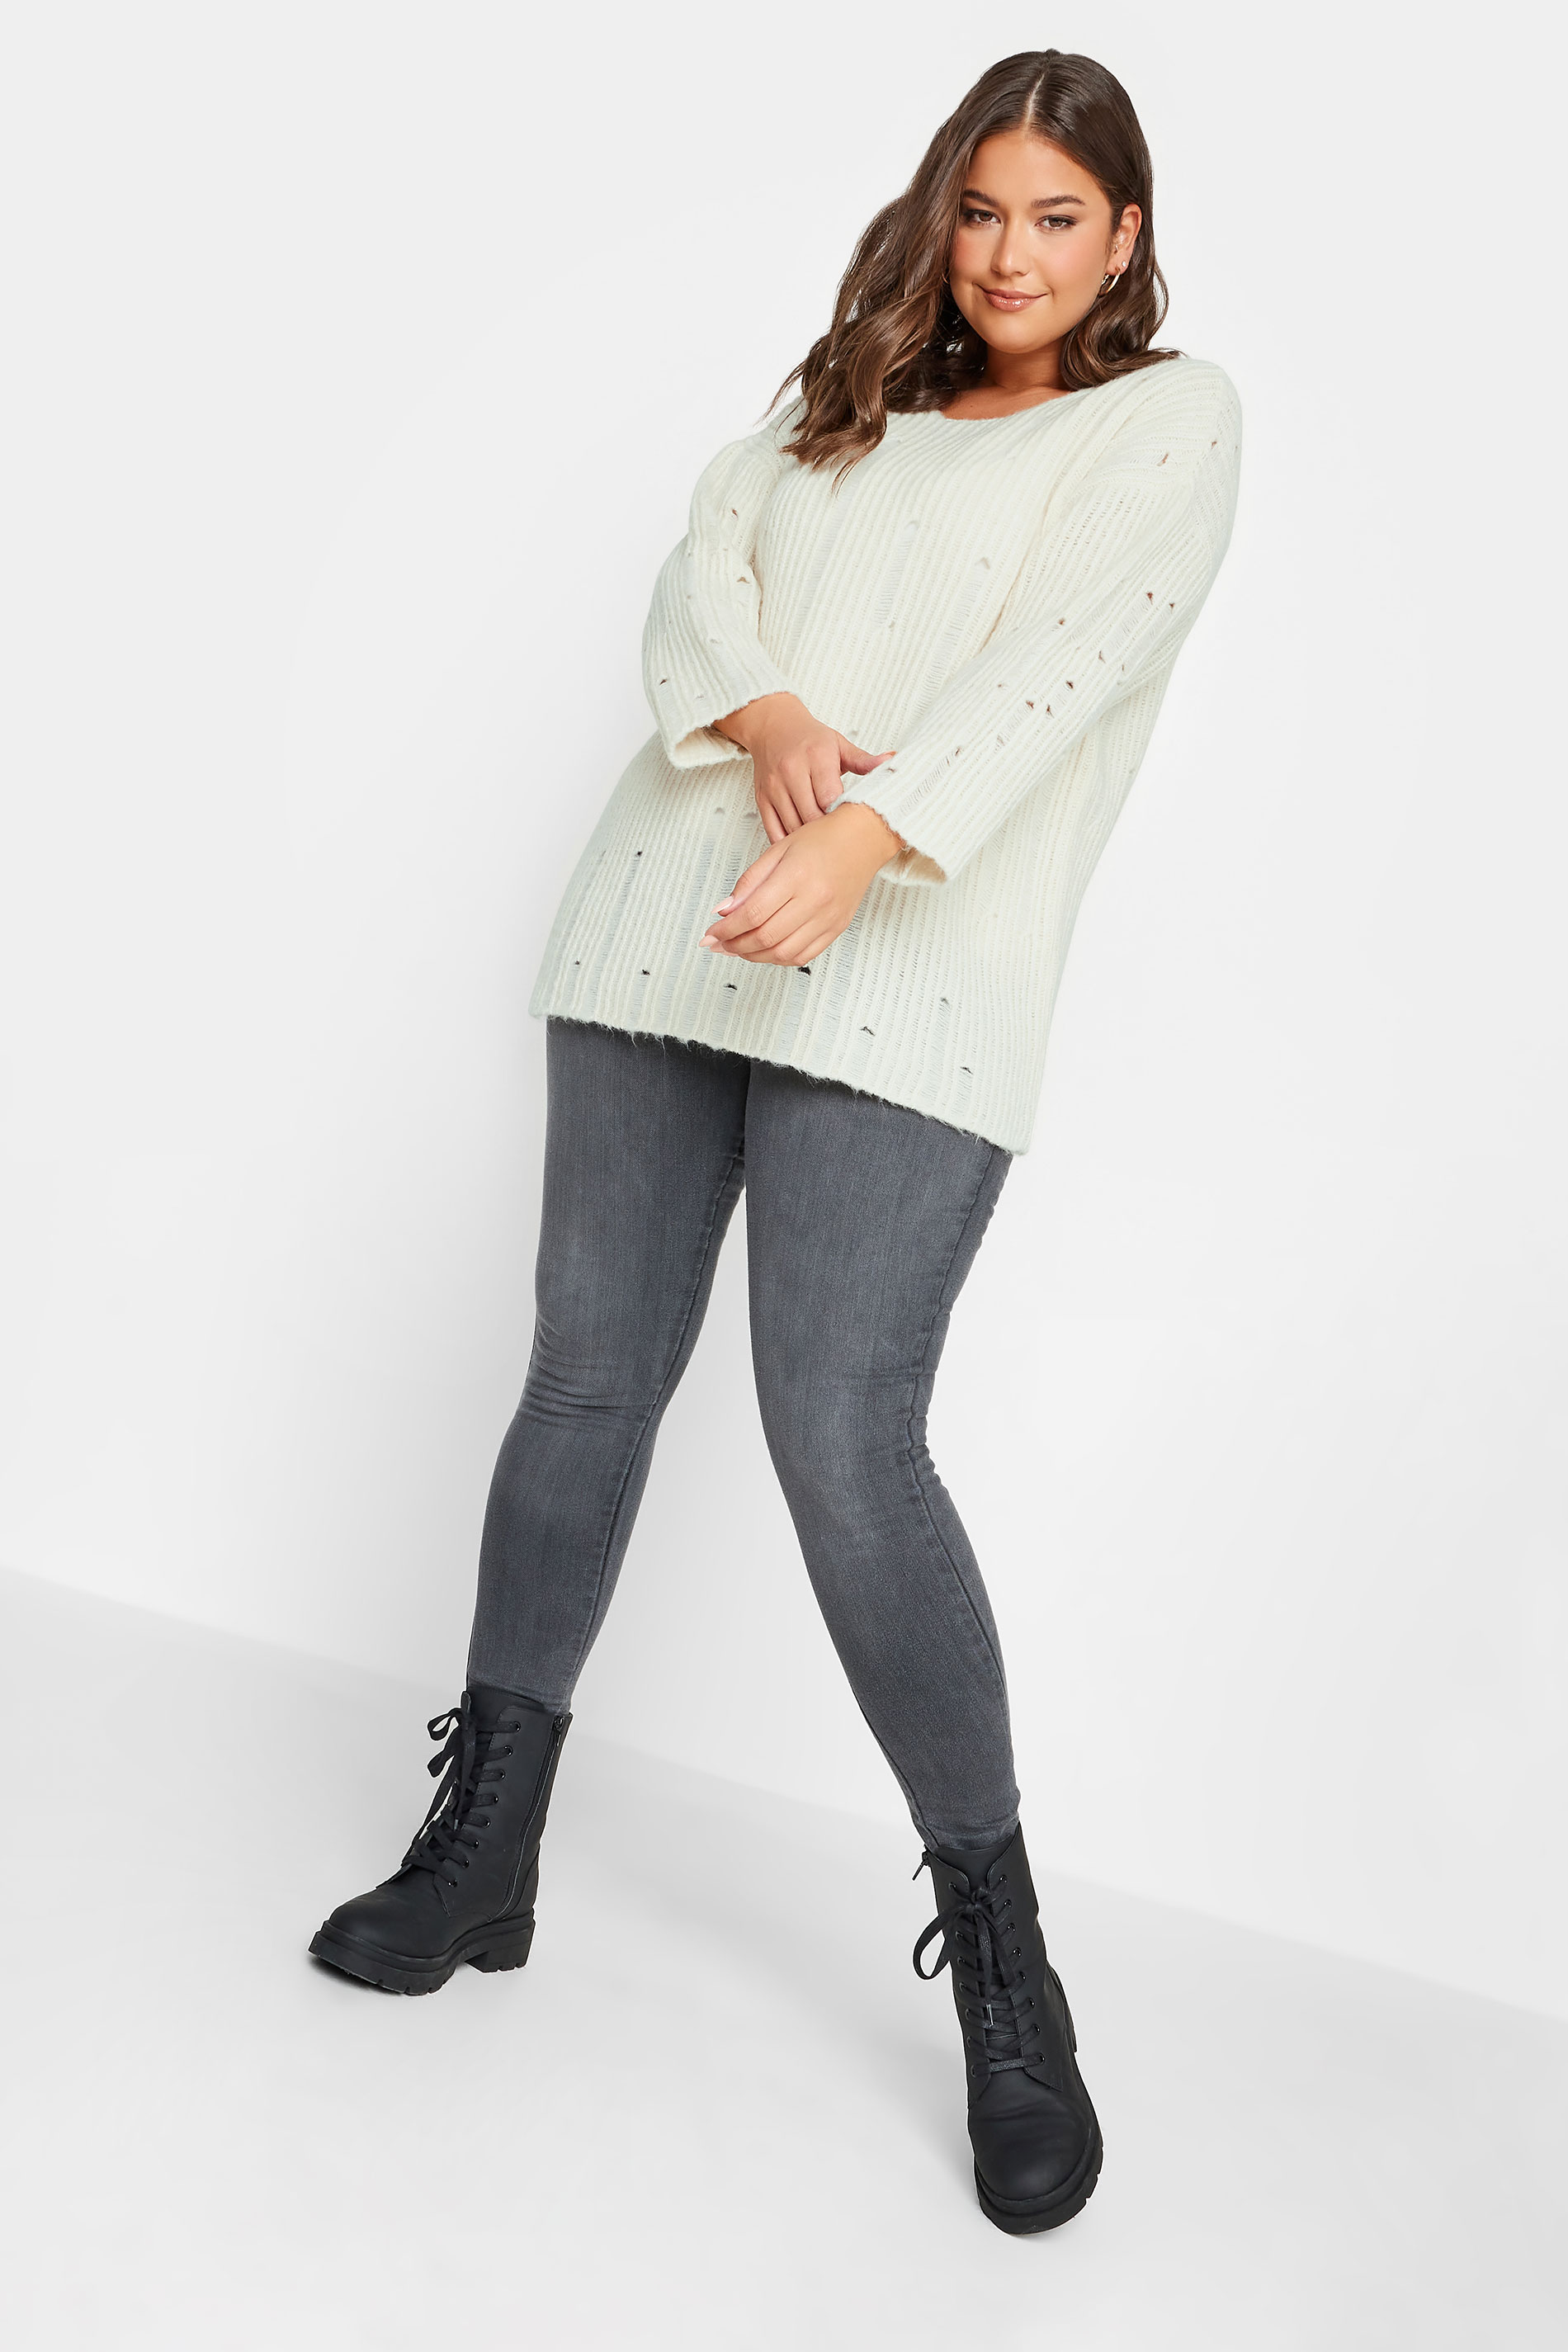 YOURS Plus Size Ivory White Distressed Knit Jumper | Yours Clothing 3